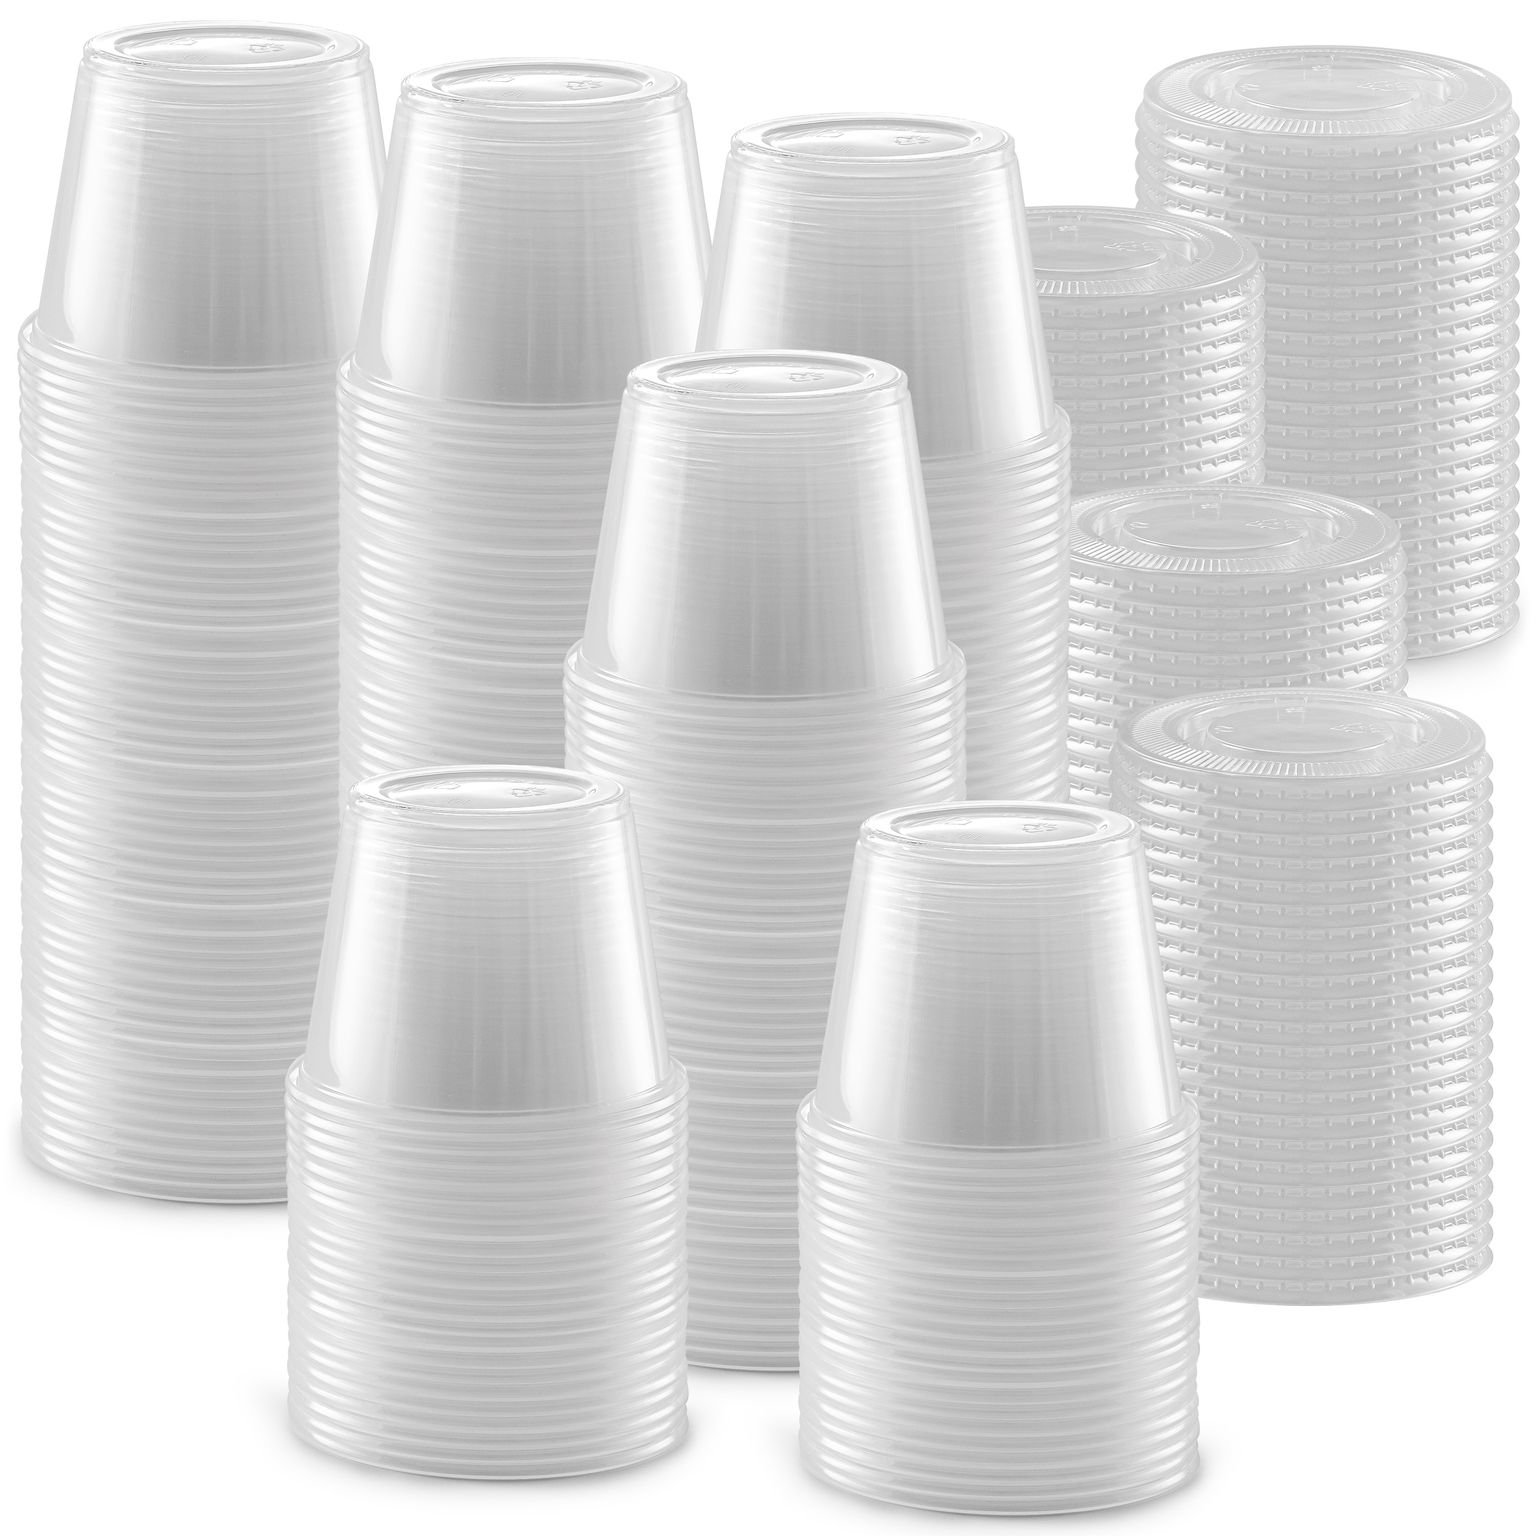 Zulay Kitchen Disposable Plastic Cups for 200 Guests